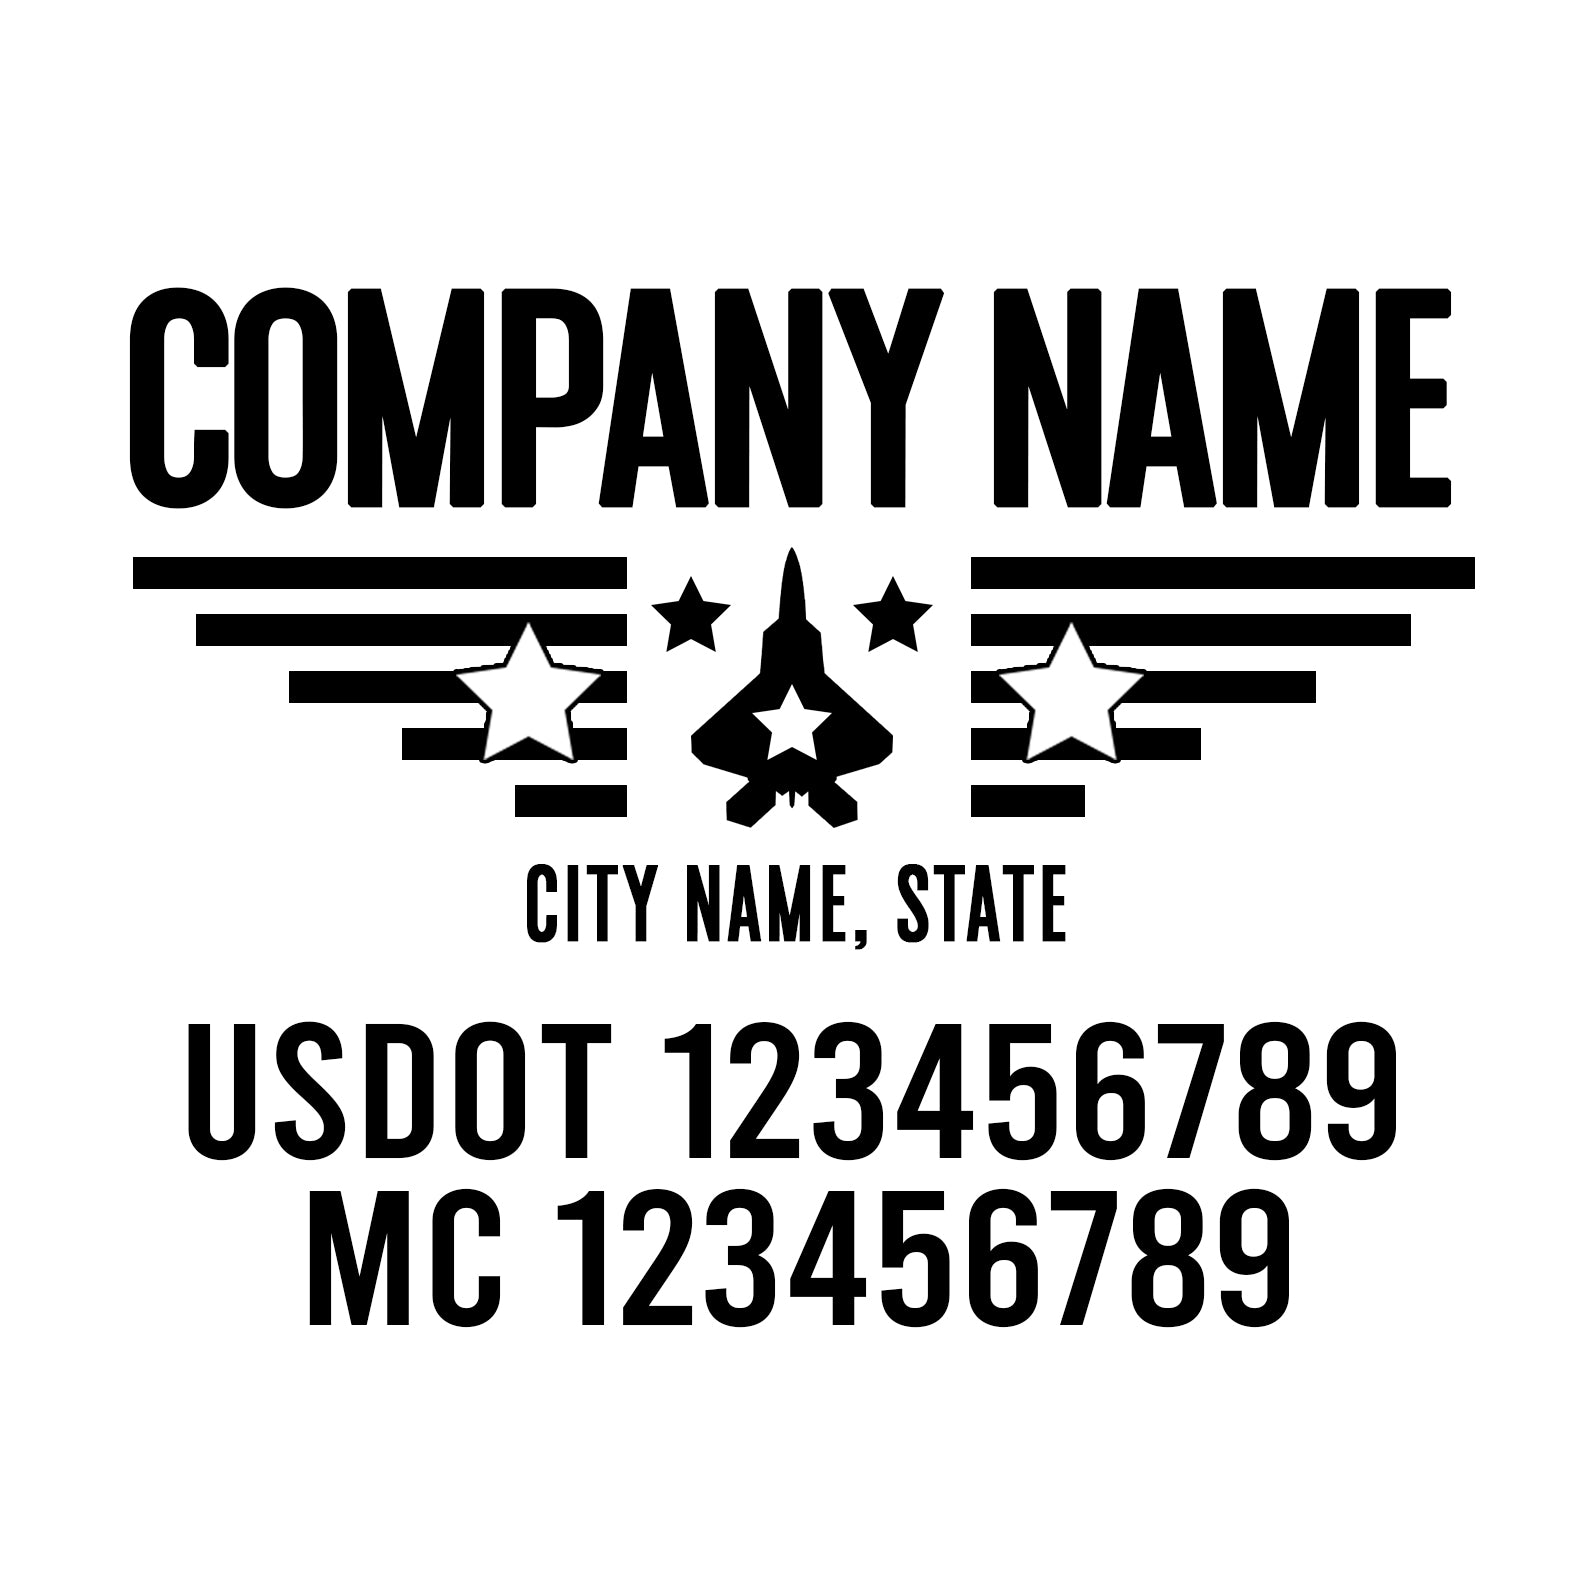 Military USDOT Decals